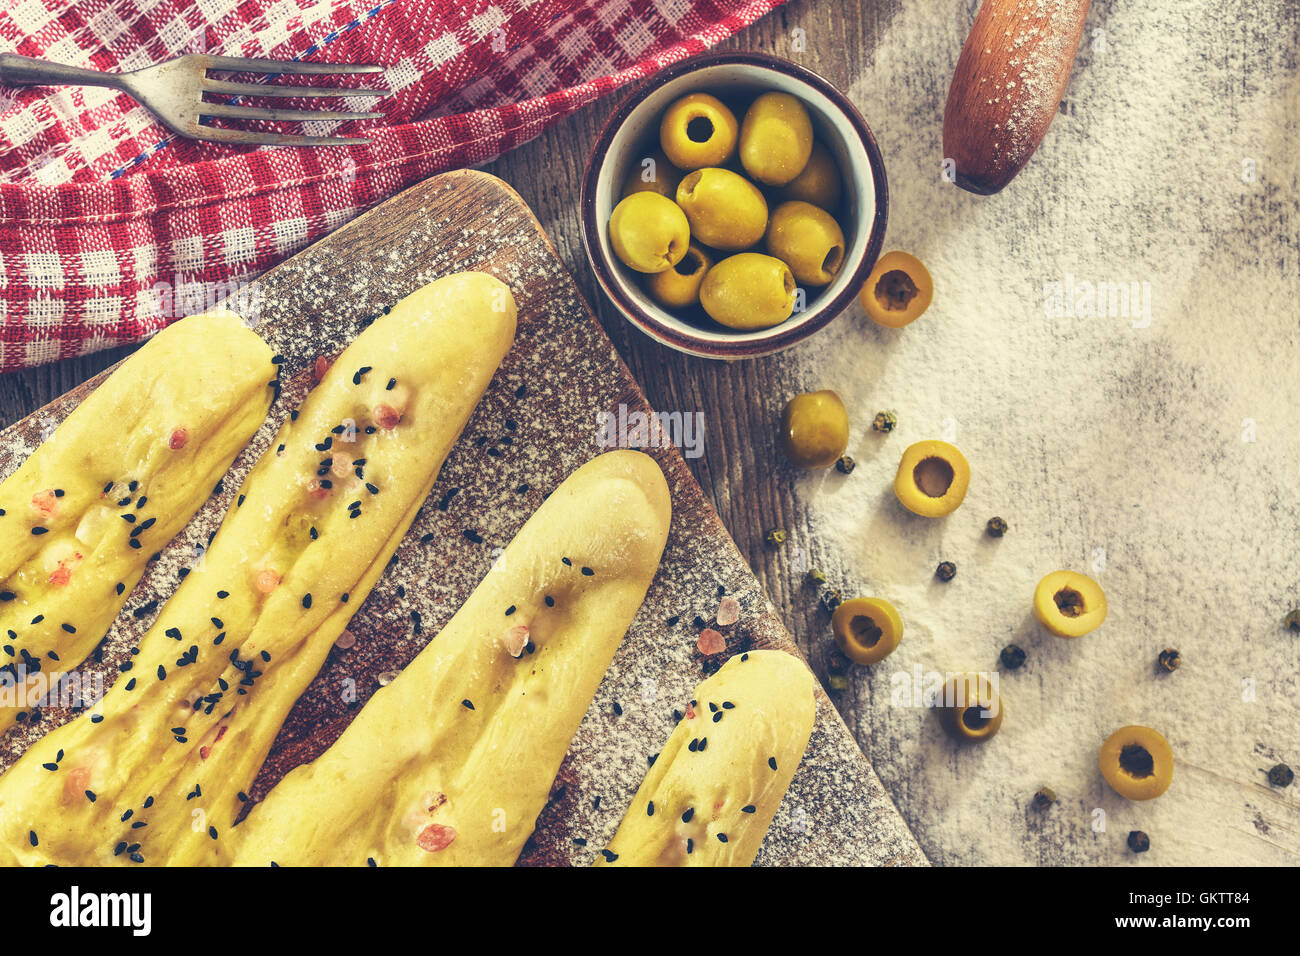 Bread sticks ready for baking, rustic setting on a wooden table. Stock Photo